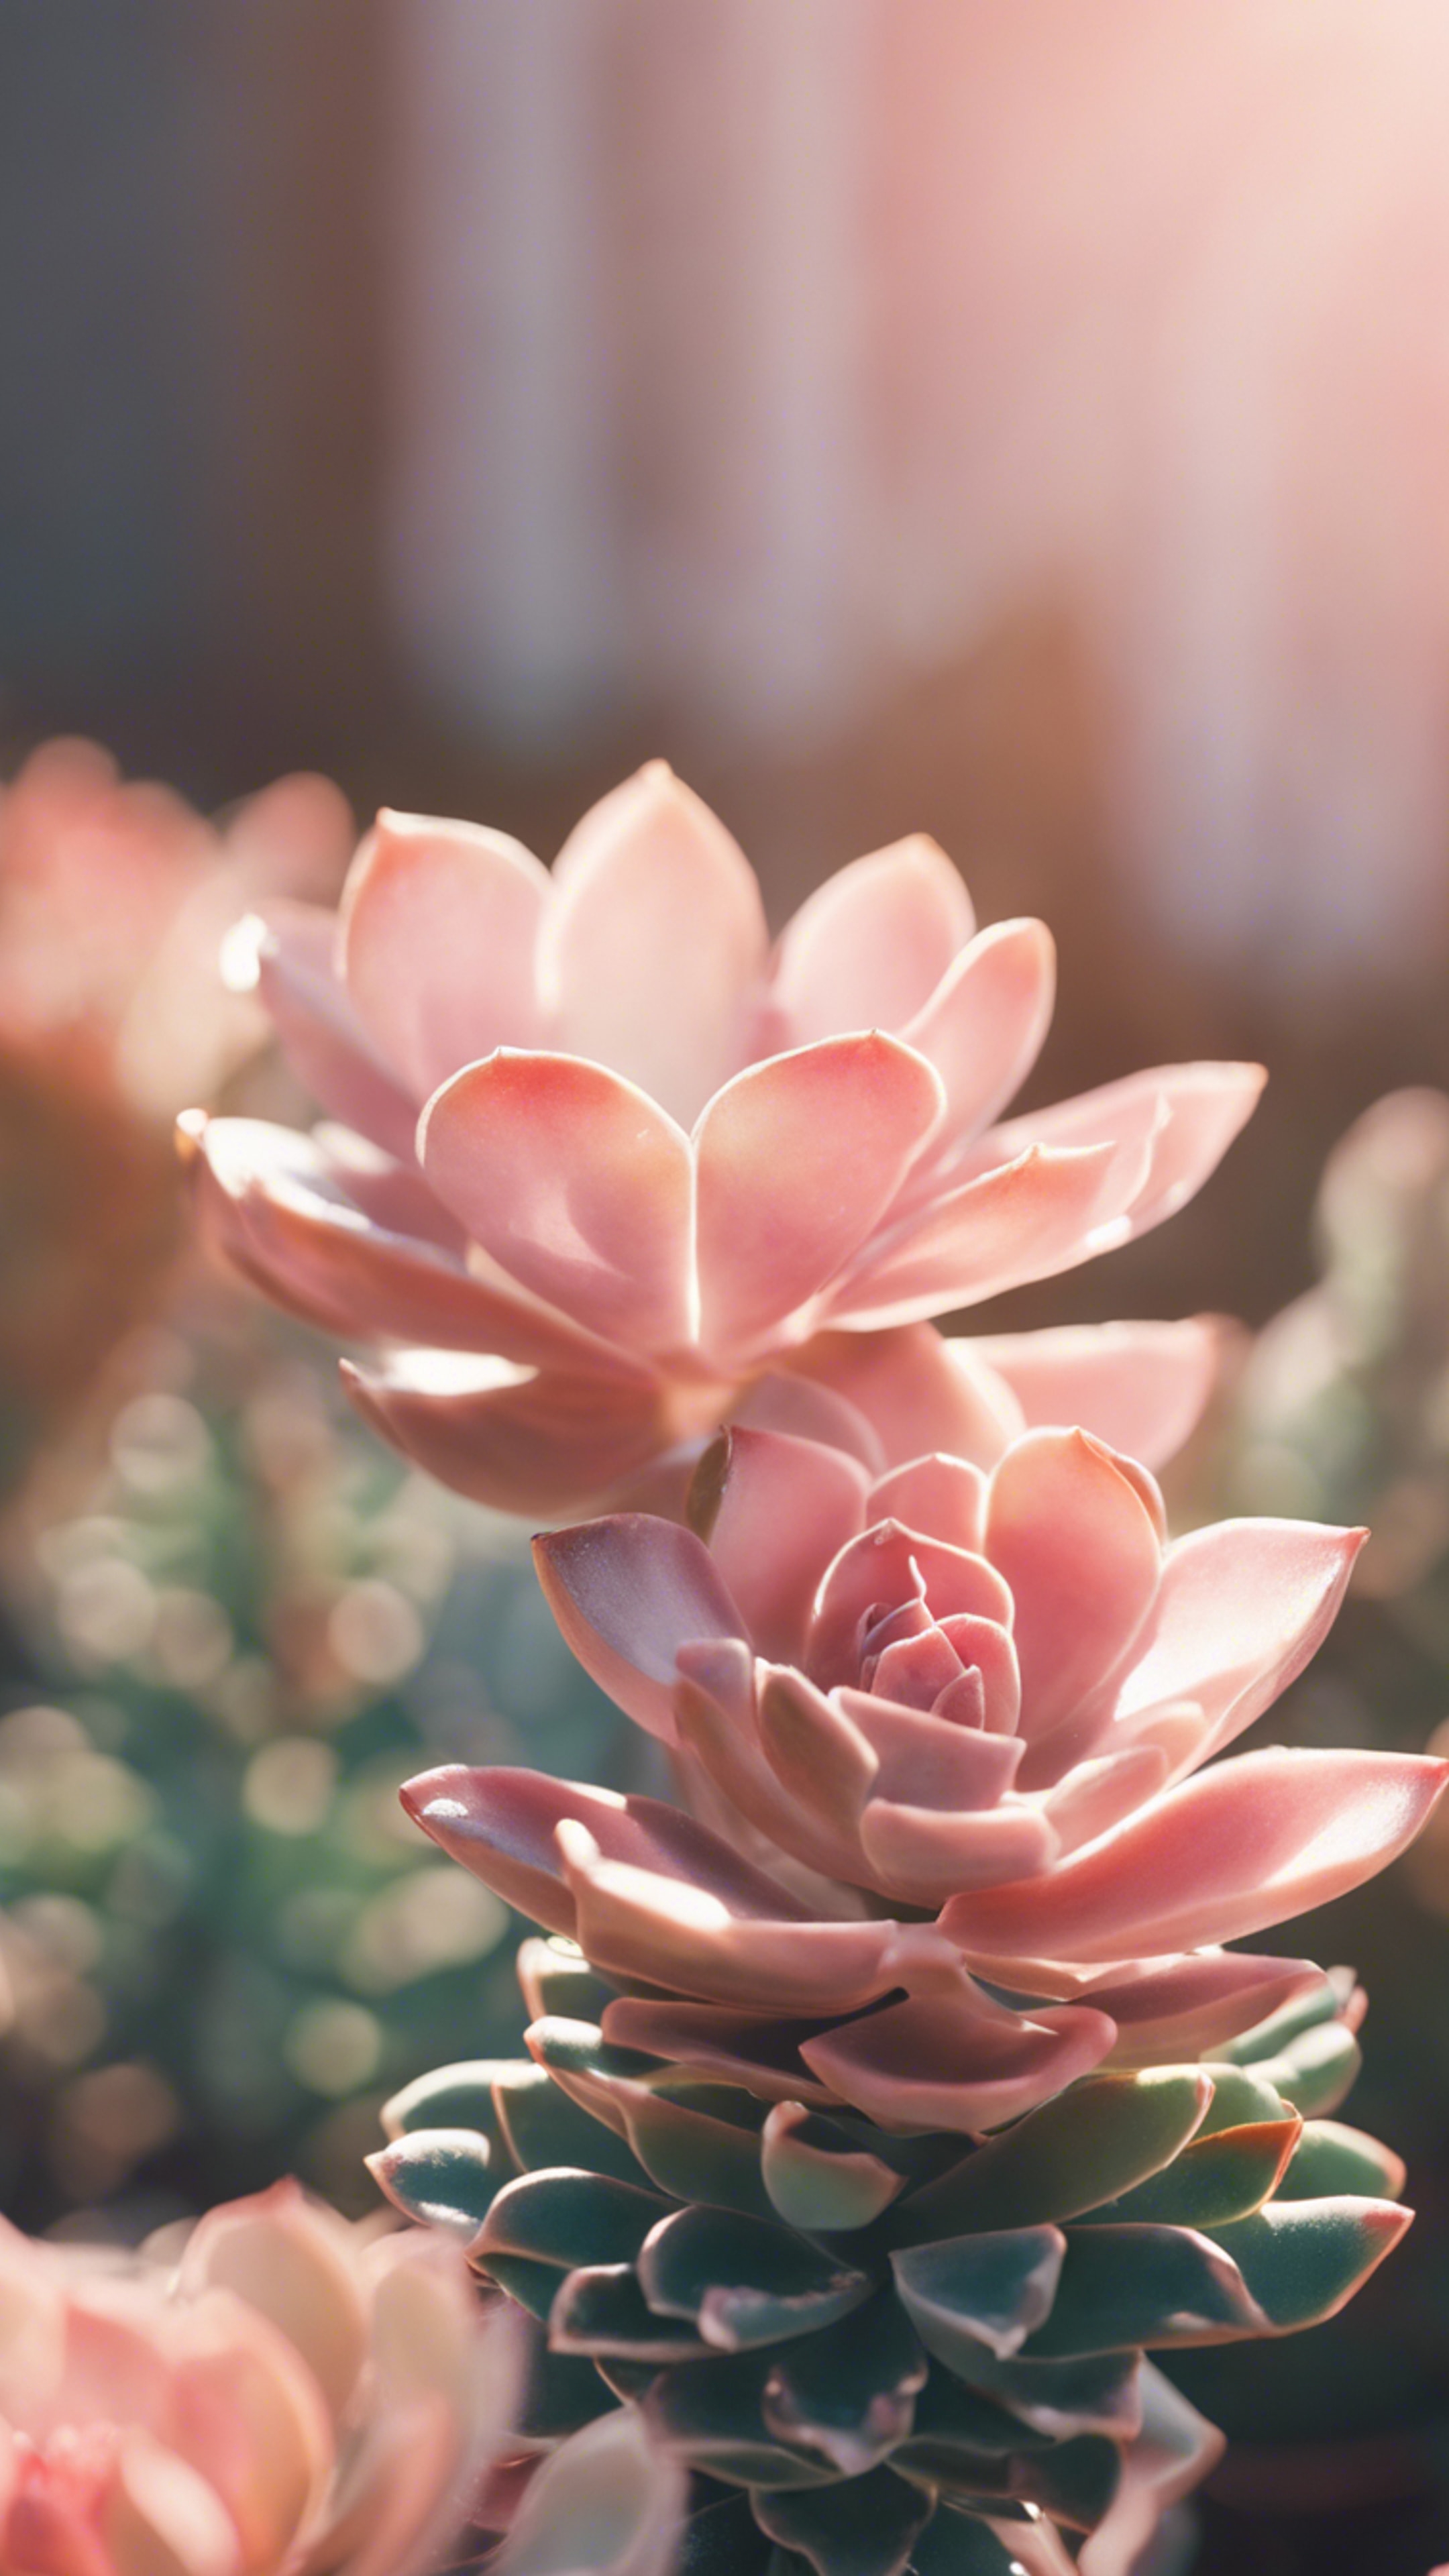 A close-up view of a preppy pastel pink succulent plant bathed in gentle morning sunshine. Tapet[96679d4148894c129b05]